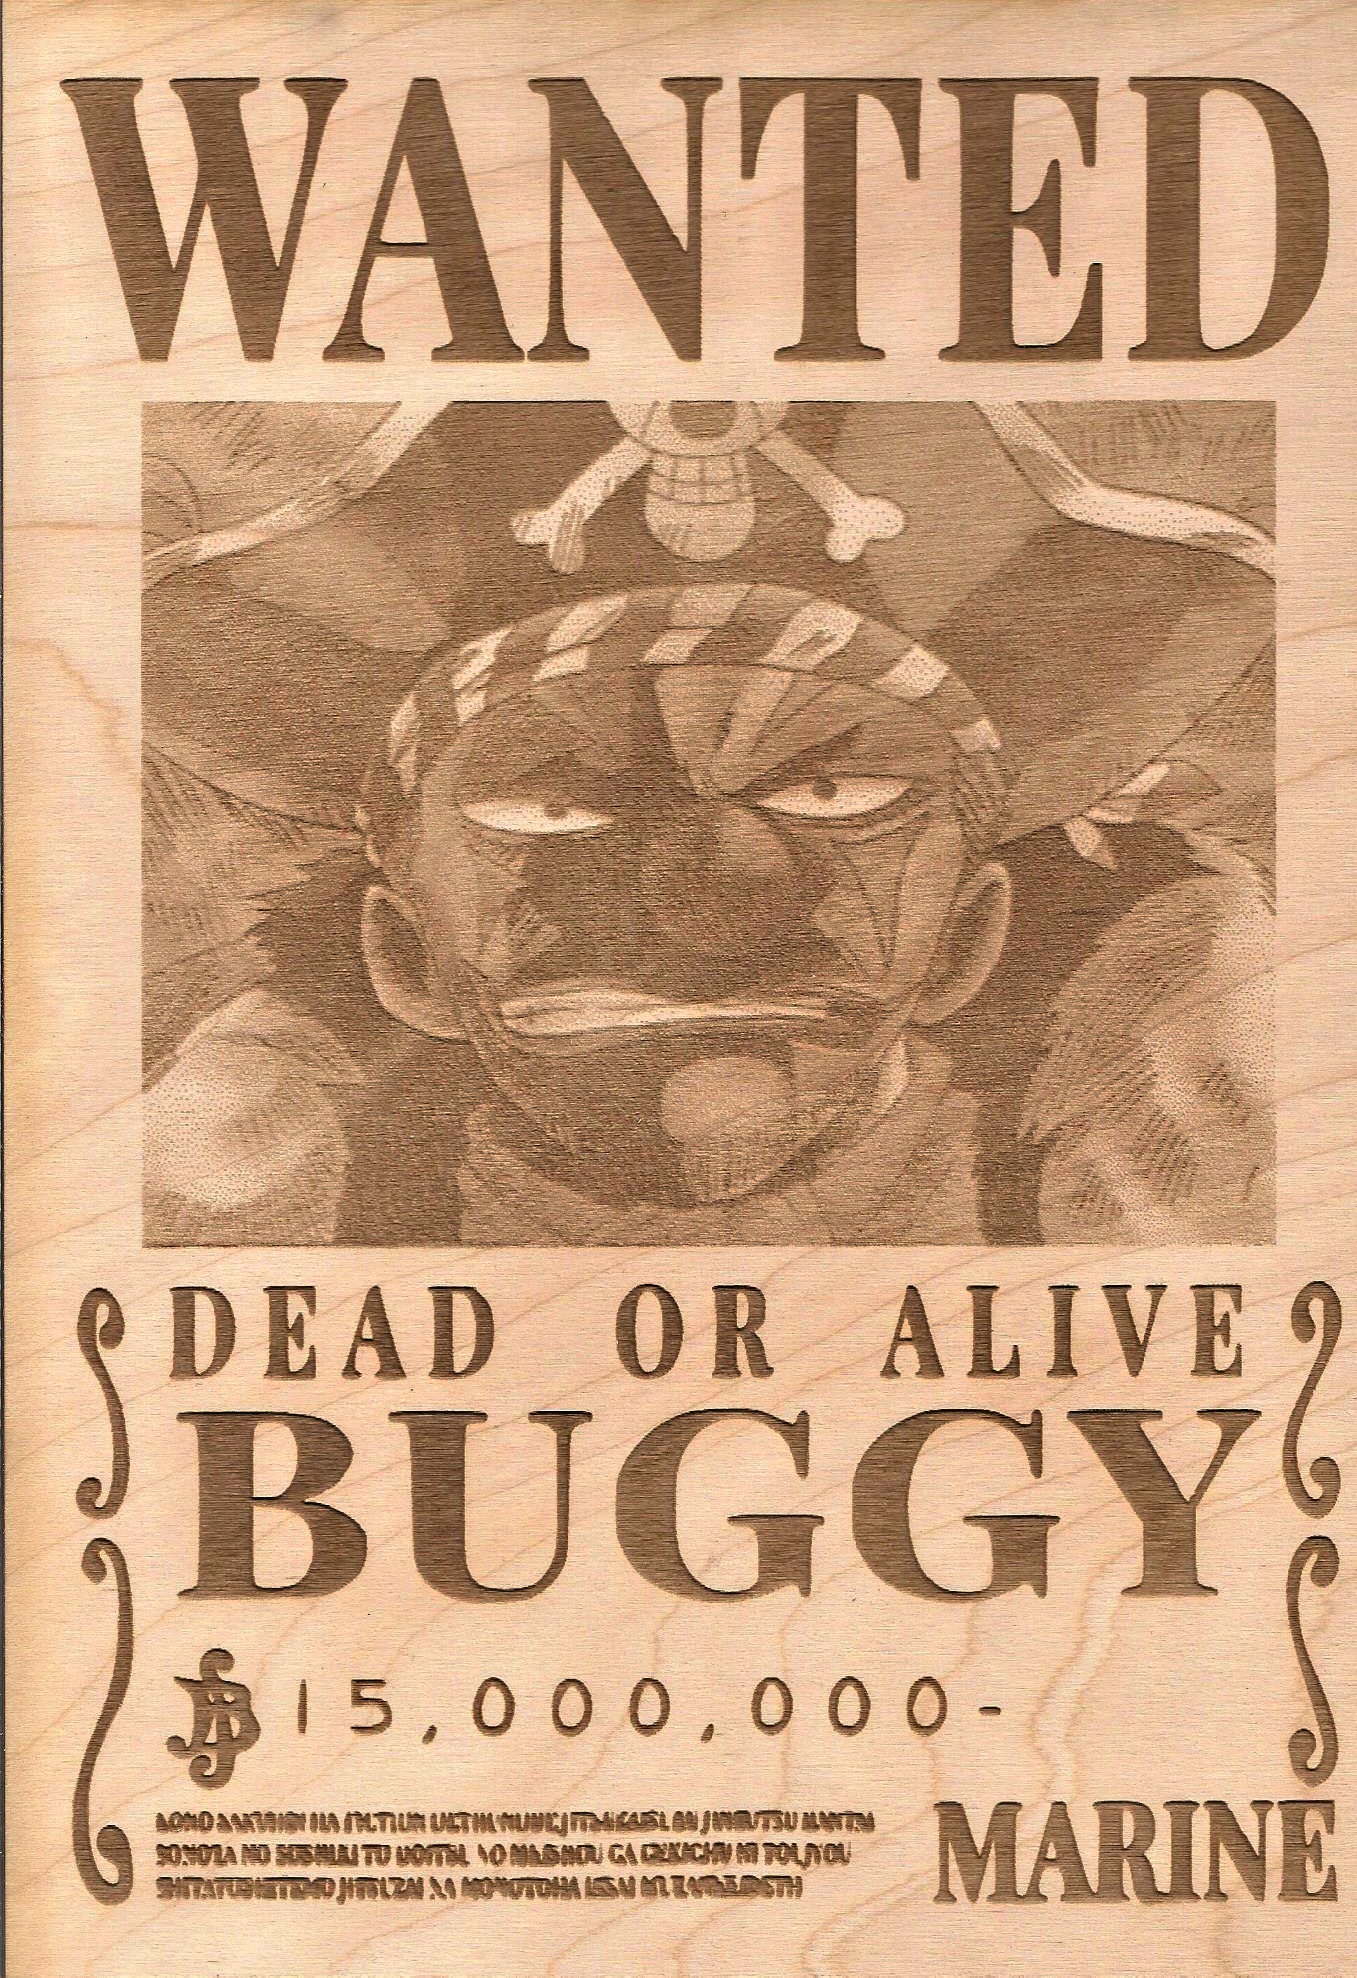 One Piece -Buggy Wanted Poster - TantrumCollectibles.com